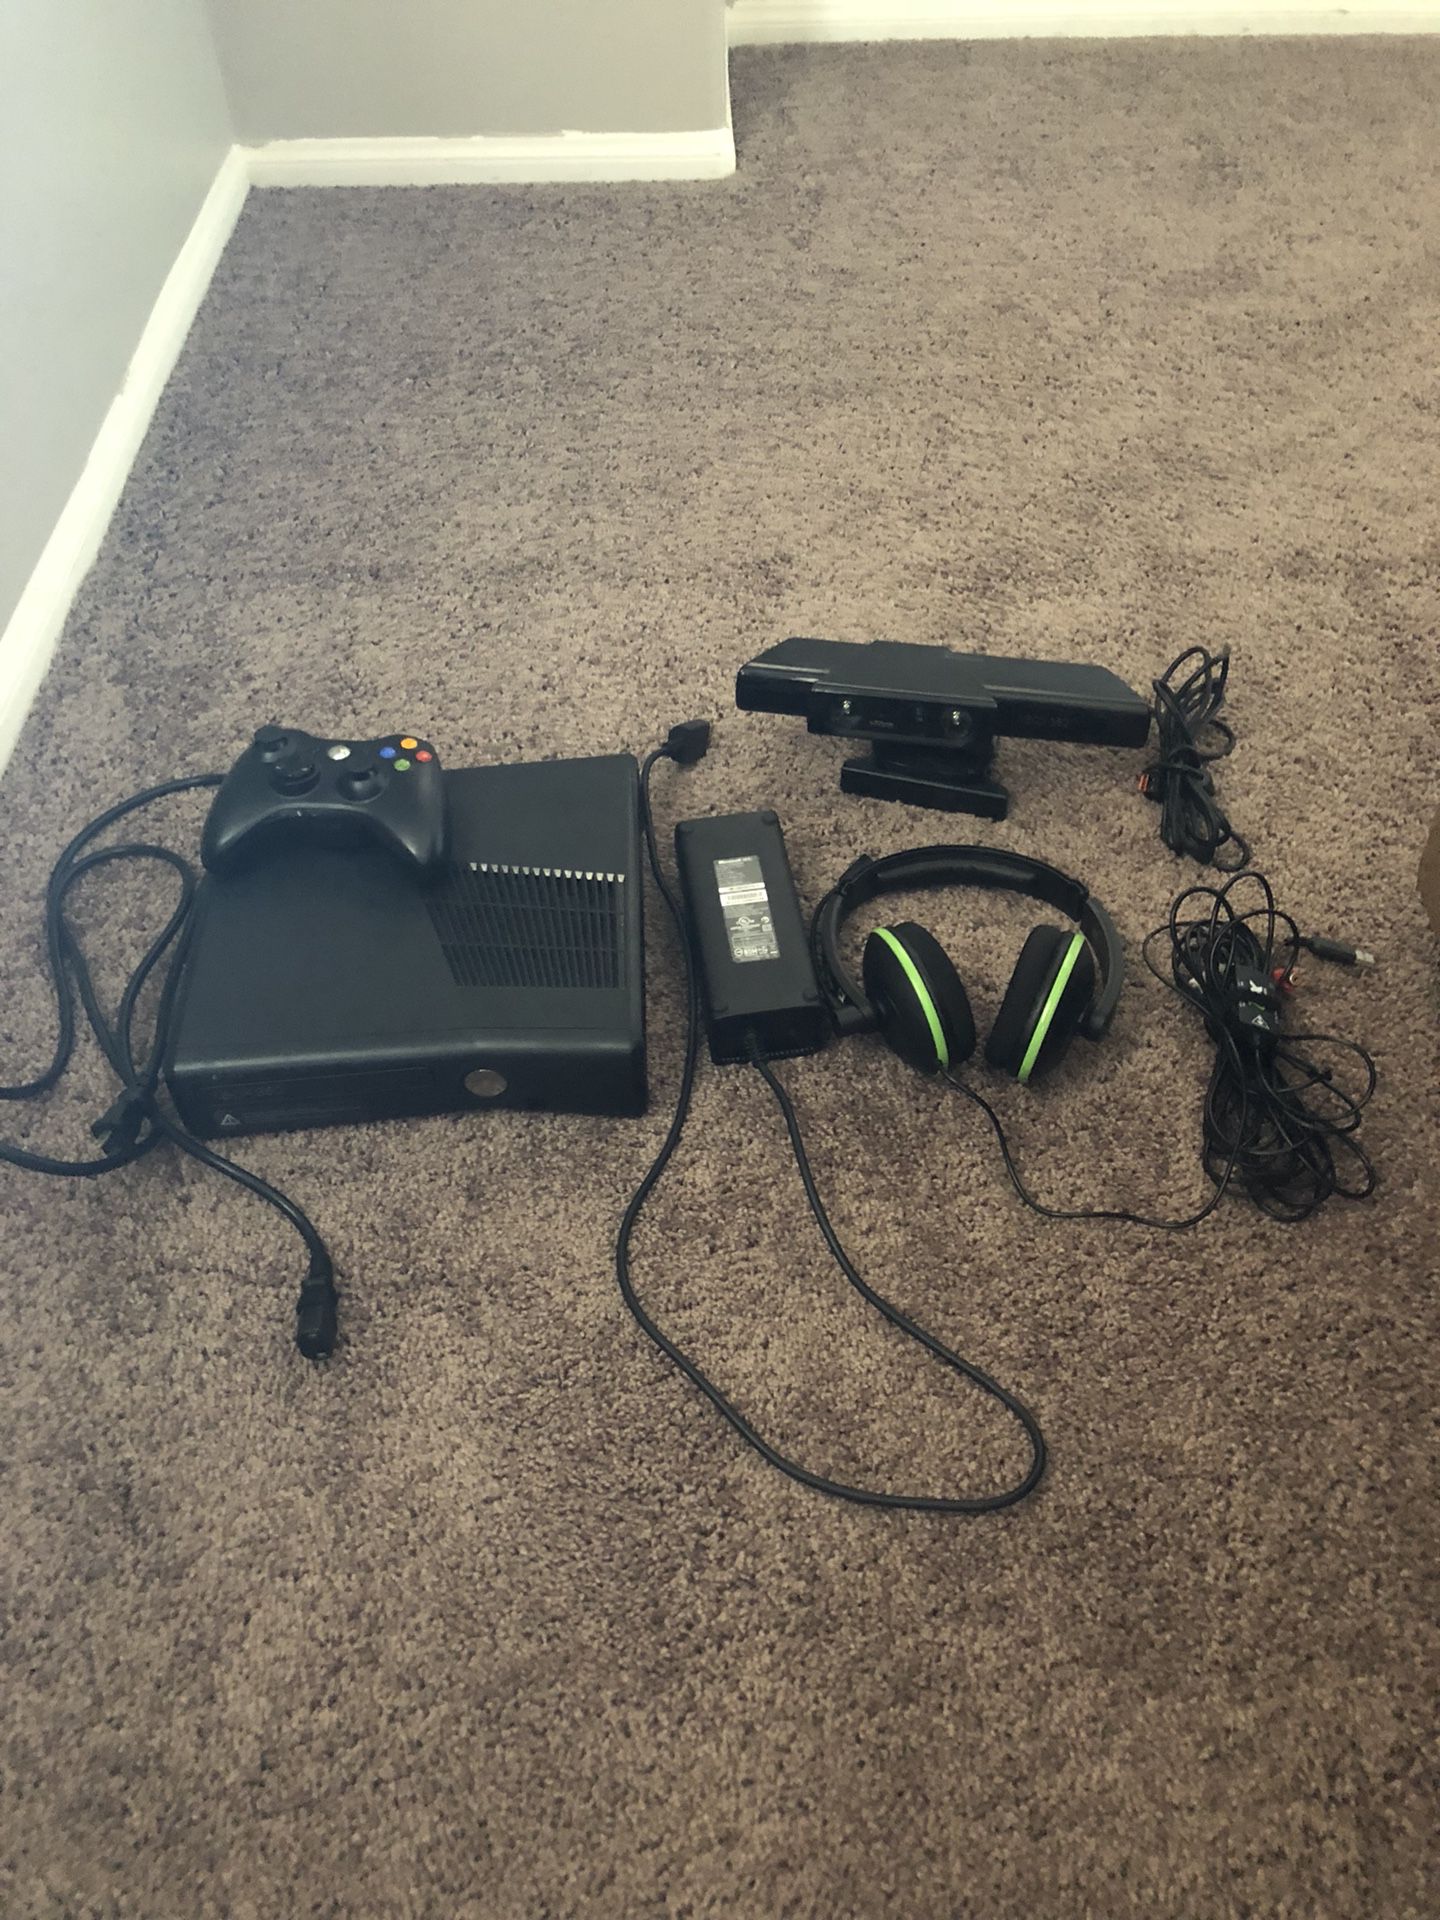 Xbox 360 for sale, 12 games included, two of them are Kinect. Turtle beach headset and Kinect are included. (12th game installed on the Xbox).